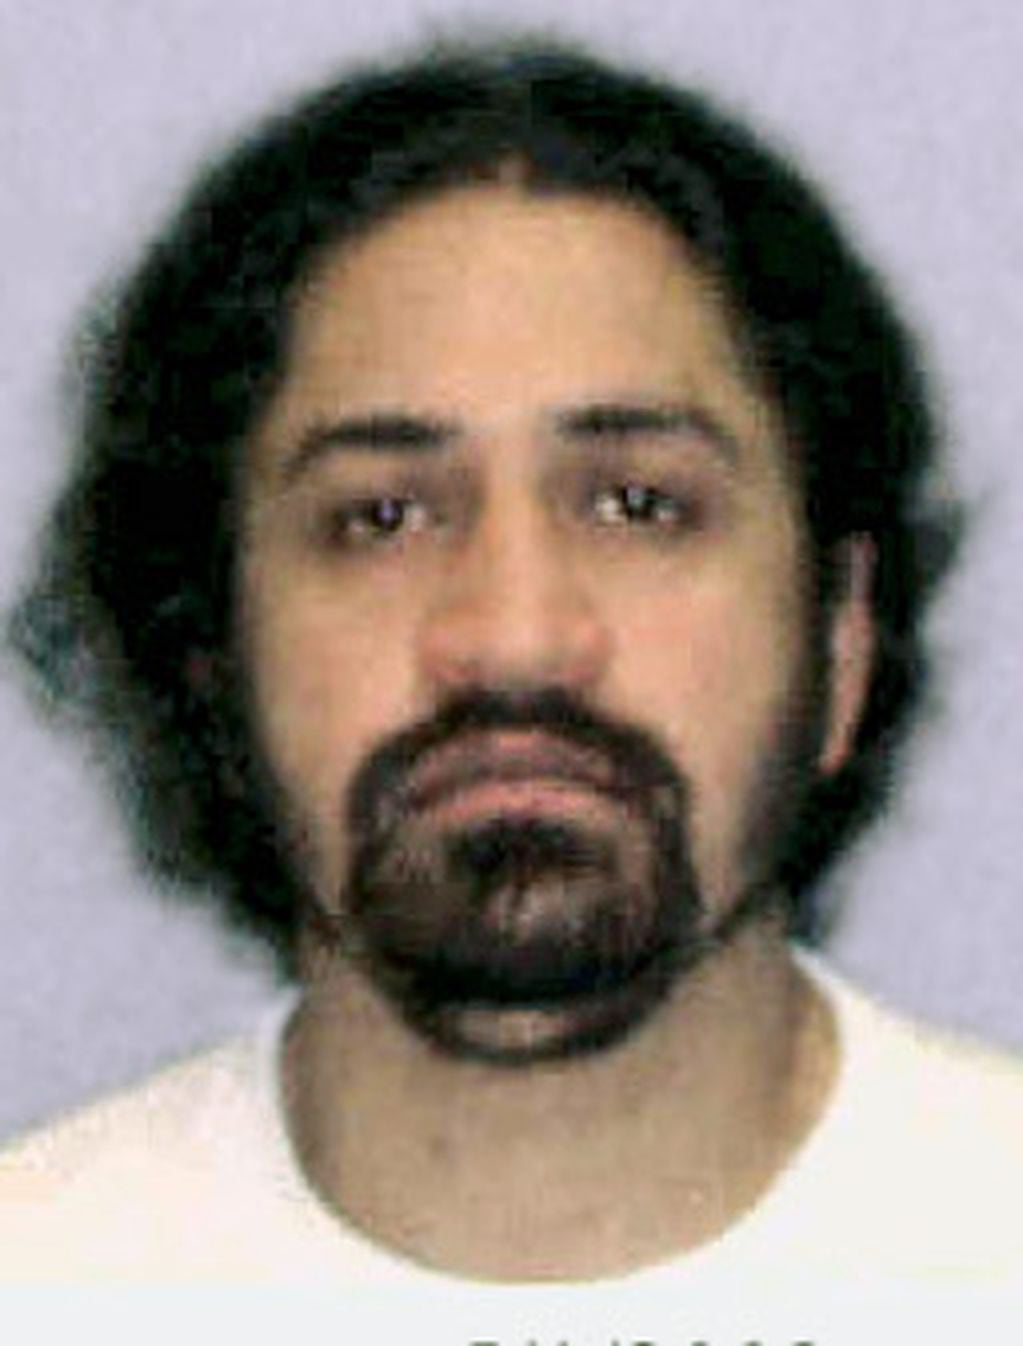 Iyman Faris, 34, is shown in this photo made available by the U.S. Justice Department. The Senate Intelligence Committee’s report on the CIA program that included torturing al-Qaida detainees provides eight “primary” examples in which the CIA said it obtained good intelligence as a result of what it called “enhanced interrogation techniques” and the Senate panel’s conclusions that the information was available elsewhere and without resorting to brutal interrogations. The CIA said the brutal interrogation of Khalid Sheikh Mohammed identified an Ohio truck driver, Iyman Faris, who later pleaded guilty to terrorism charges. (AP Photo/Dept. of Justice)  Iyman Faris terrorista de al qaeda capturado gracias a los interrogatorios bajo tortura de la cia terrorismo terroristas al qaeda